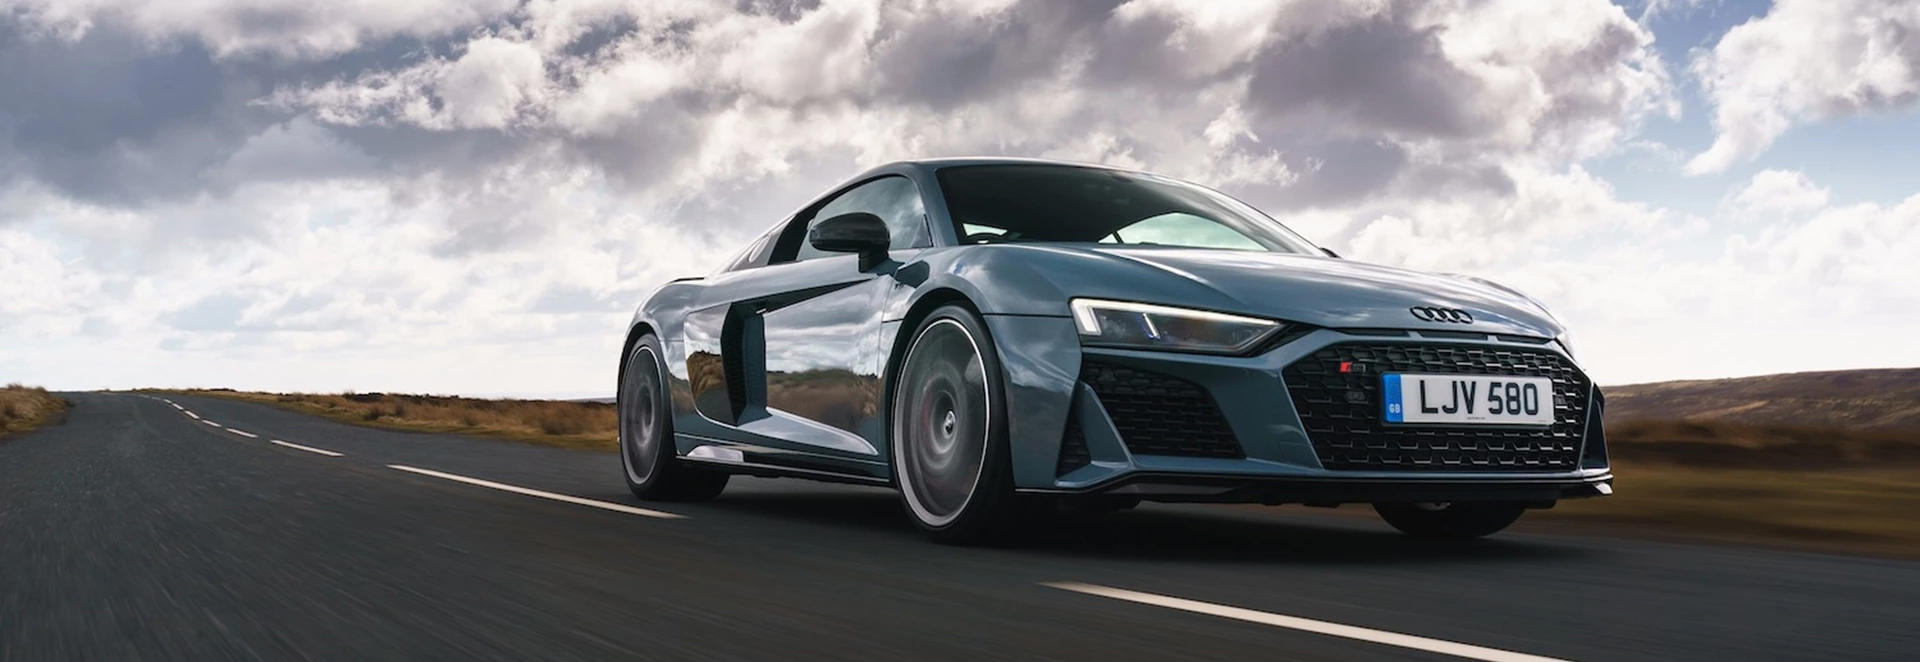 Audi introduces latest R8 V10 and TT RS models